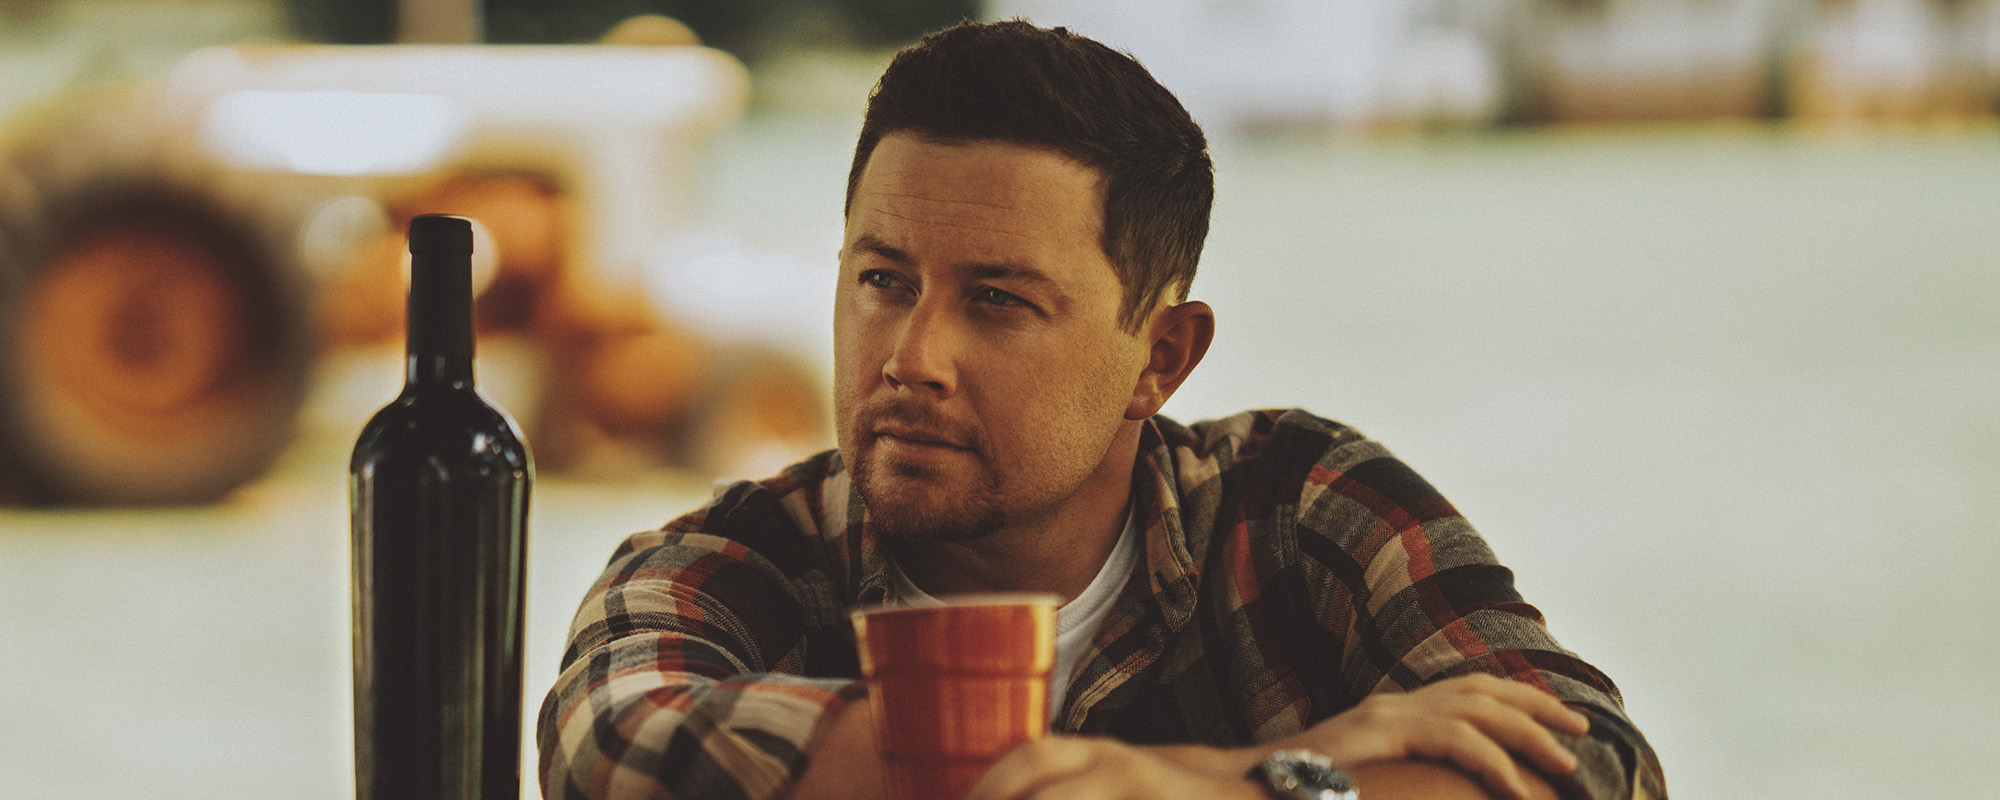 Scotty McCreery Mourns Lost Love on “Cab In a Solo”